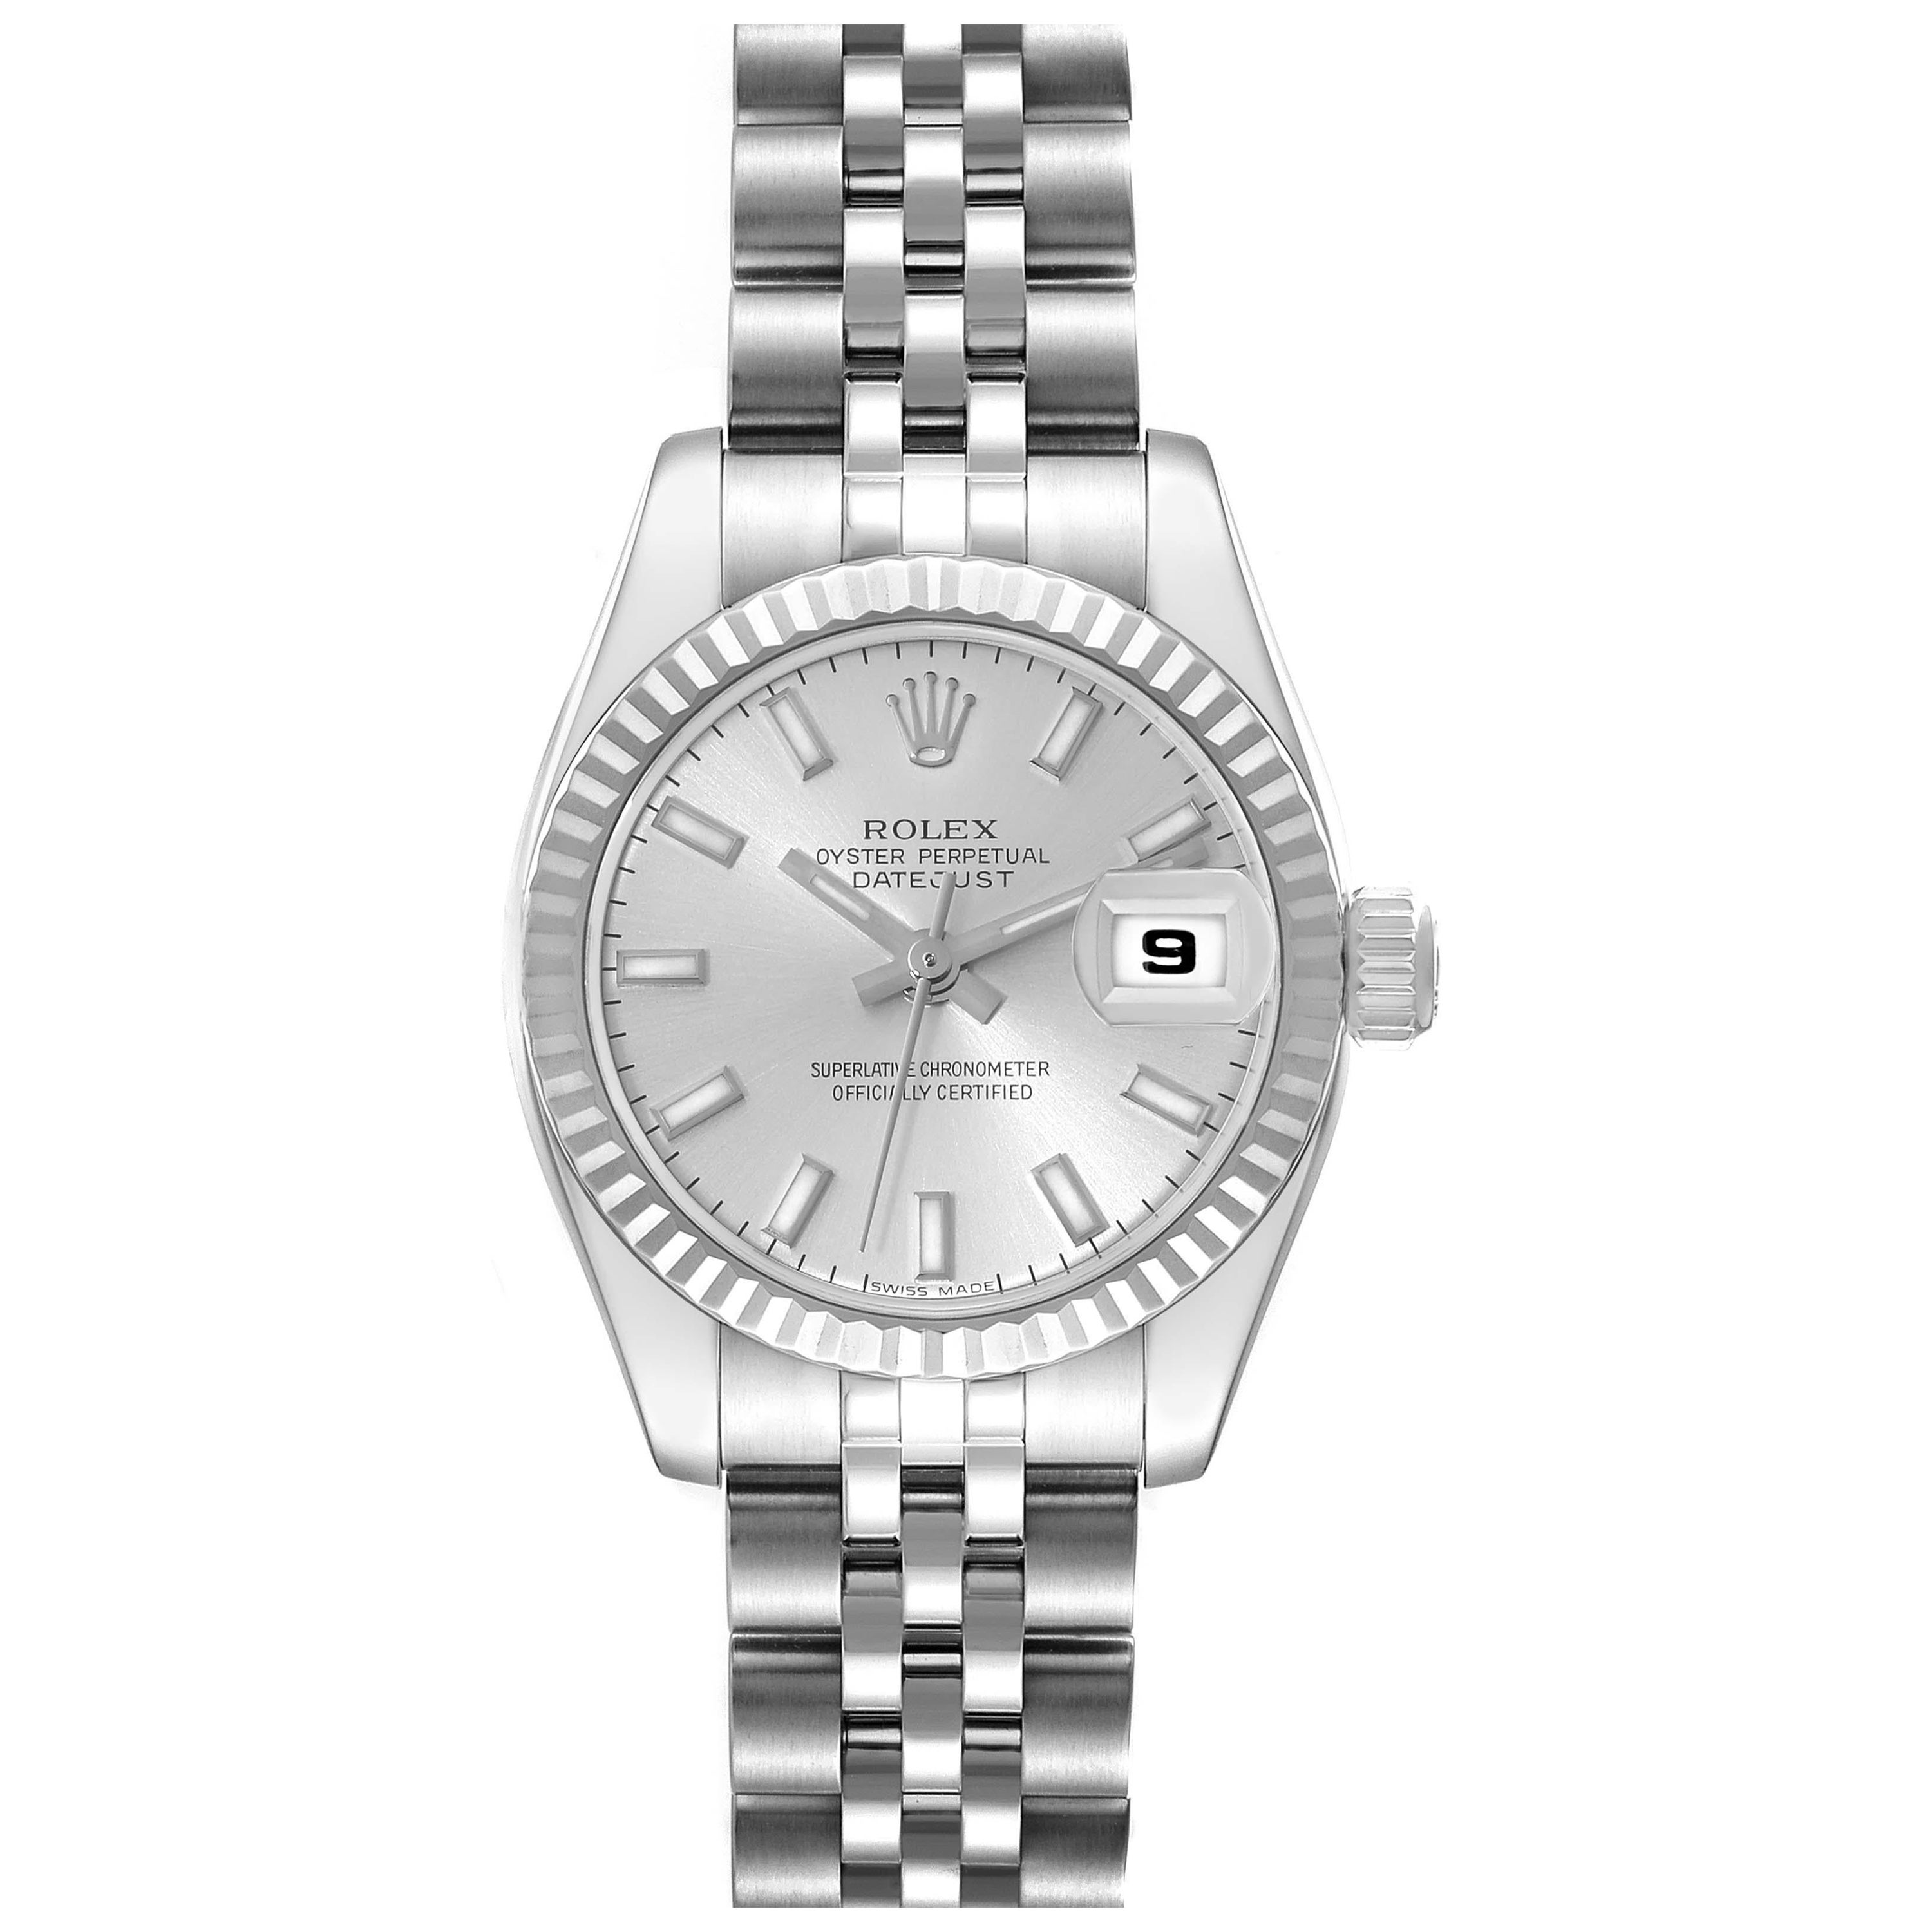 Rolex Datejust Steel White Gold Silver Dial Ladies Watch 179174 Box Papers